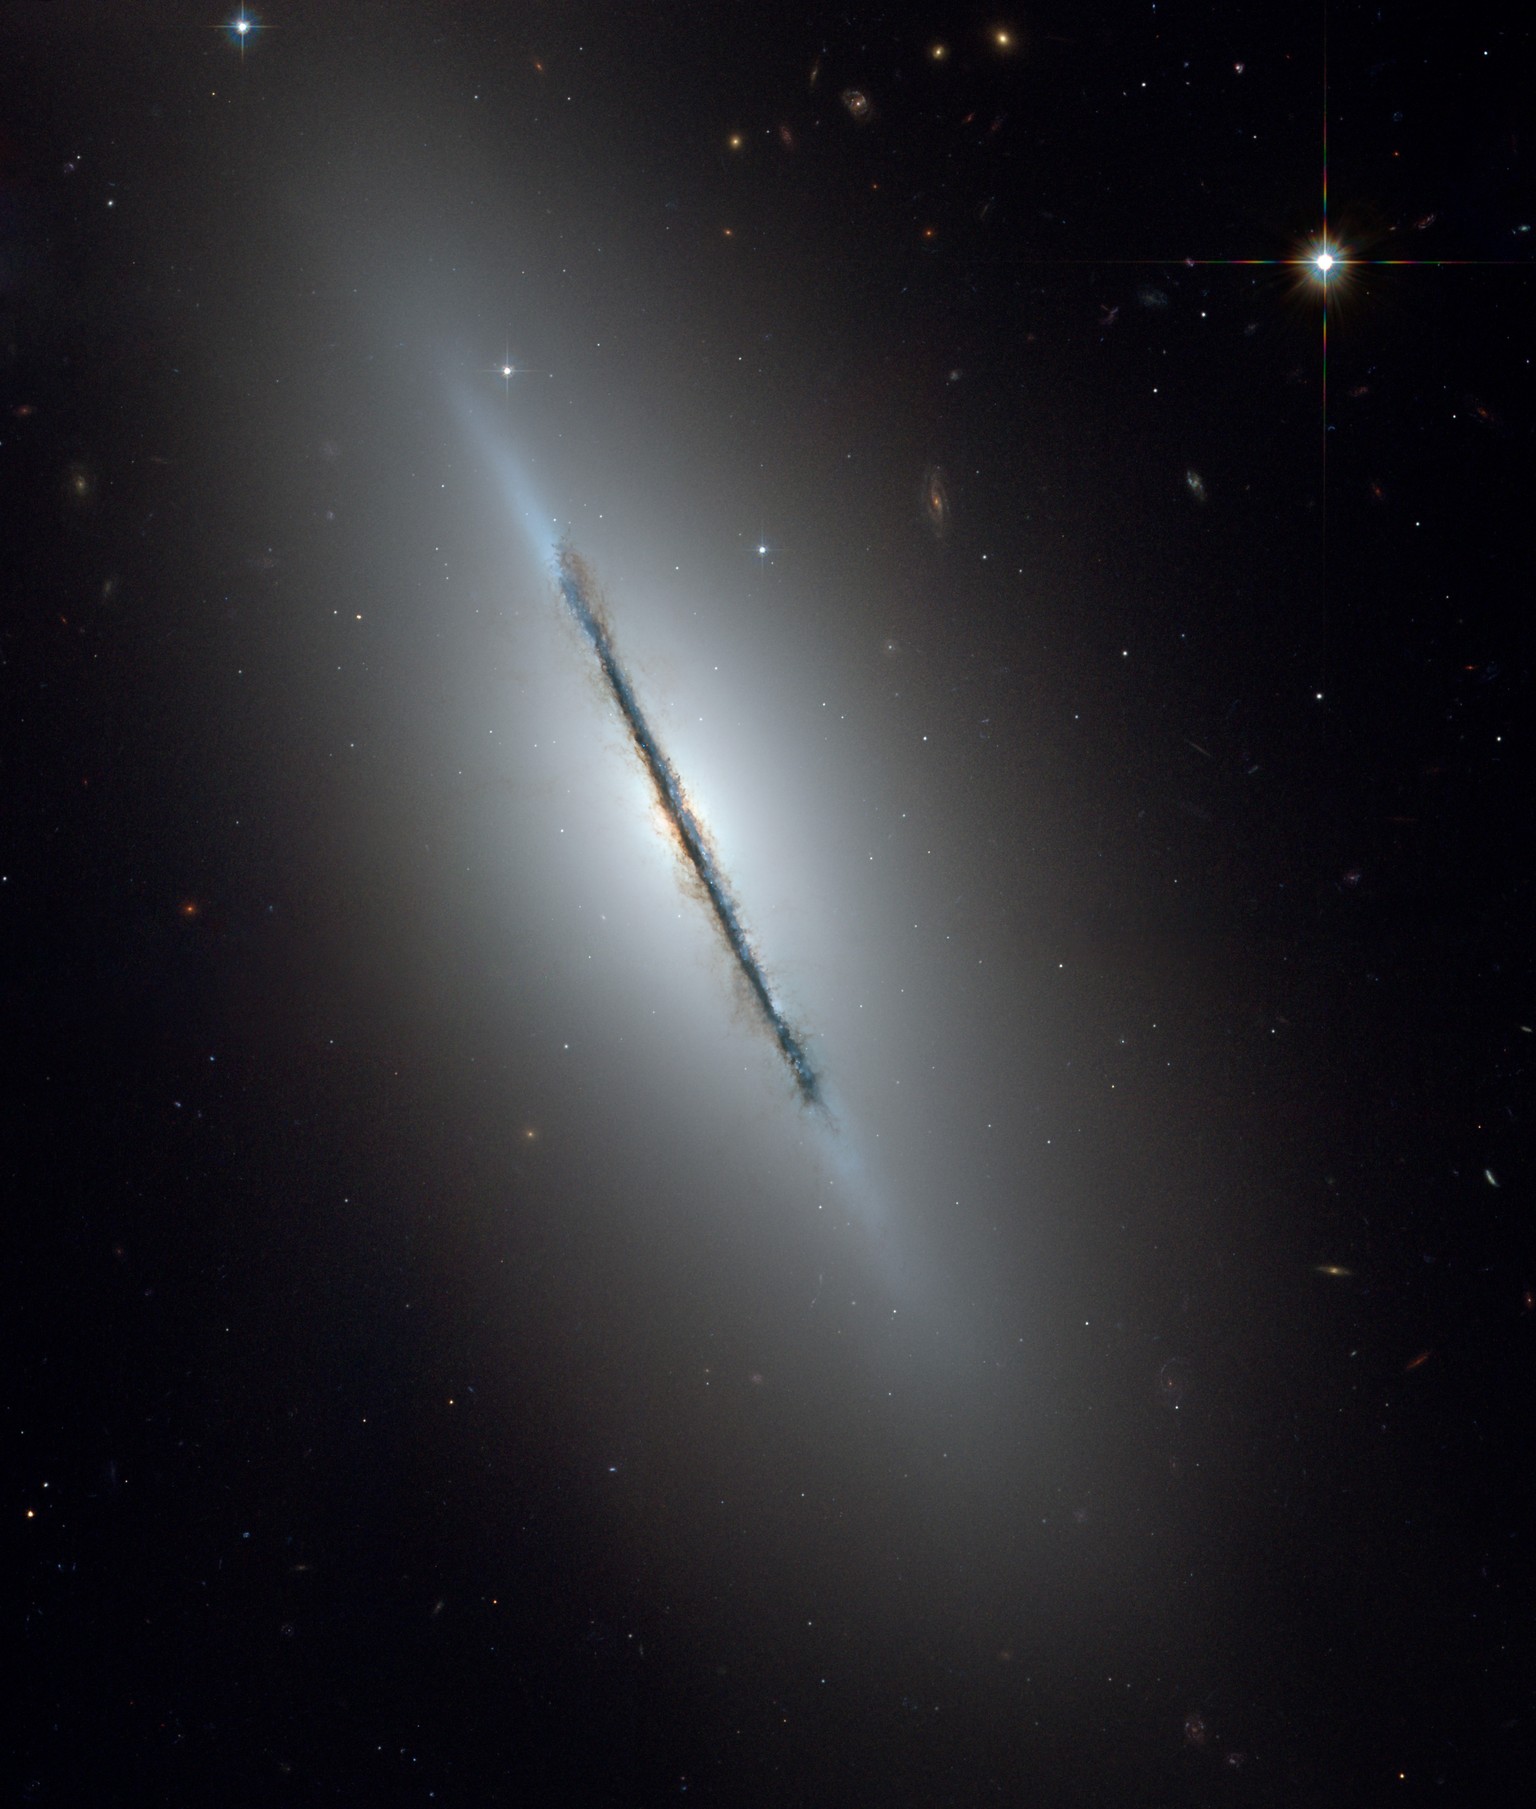 This is a unique NASA/ESA Hubble Space Telescope view of the disk galaxy NGC 5866 tilted nearly edge-on to our line-of-sight. Hubble&#039;s sharp vision reveals a crisp dust lane dividing the galaxy i ...